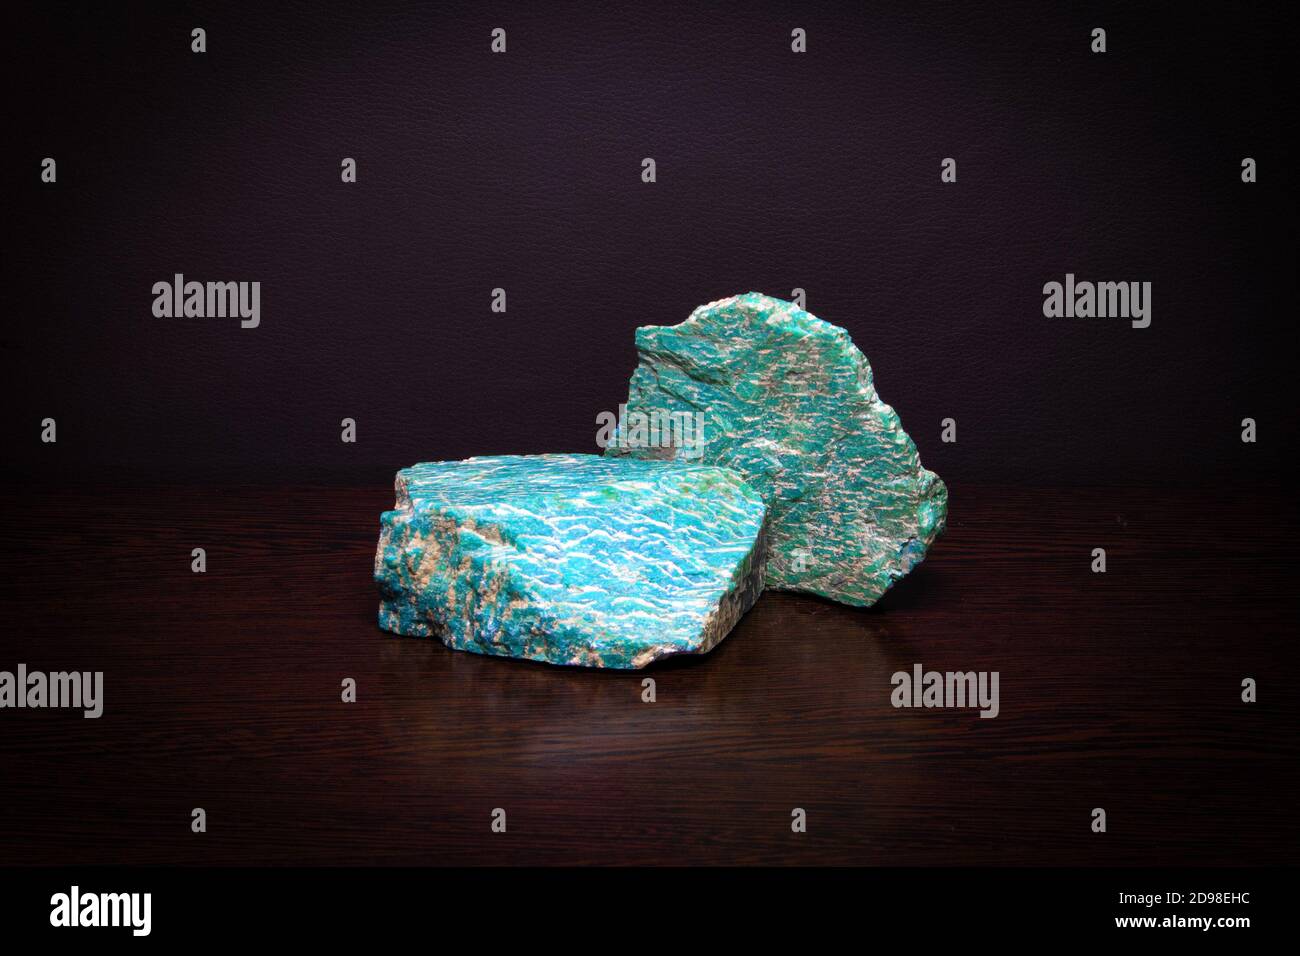 Two pieces of beautiful bright semiprecious mineral amazonite lying on a wooden surface Stock Photo